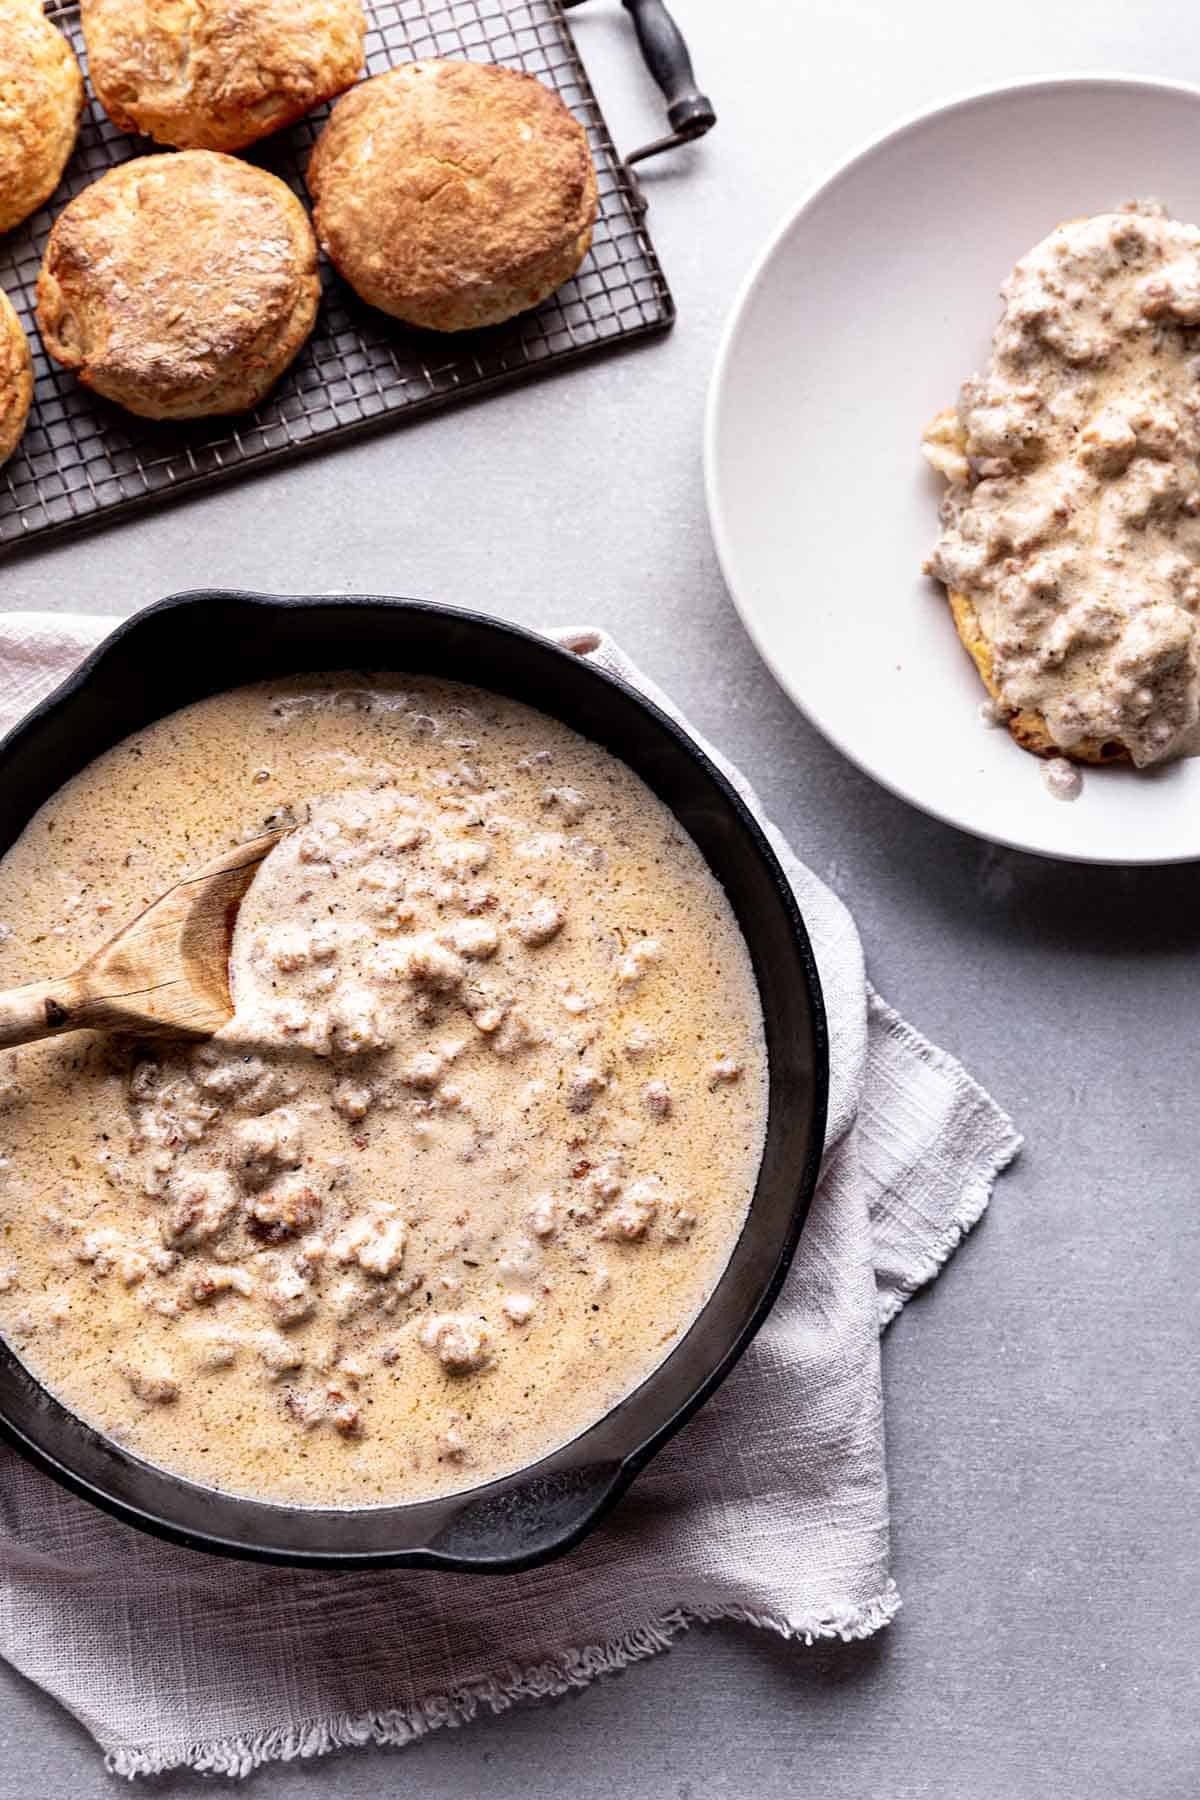 A pan with sausage gravy, a cooling rack with biscuits and a plate of biscuits and gravy.